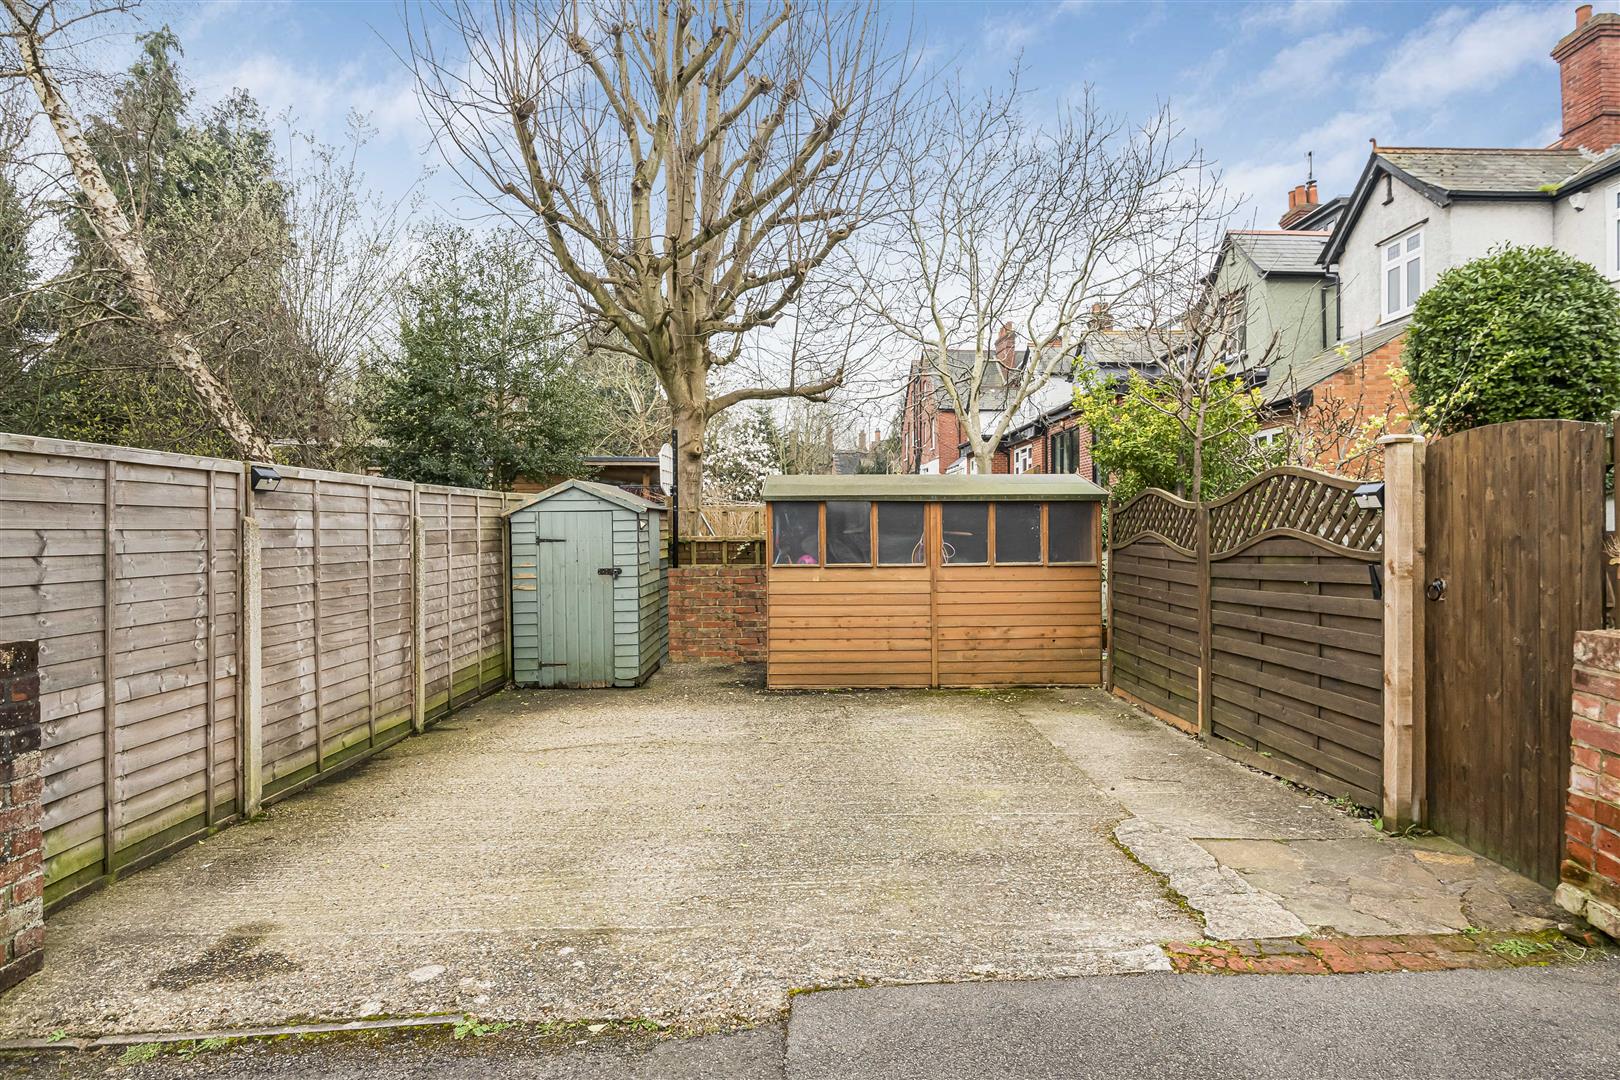 Russell Street Reading house for sale in Reading